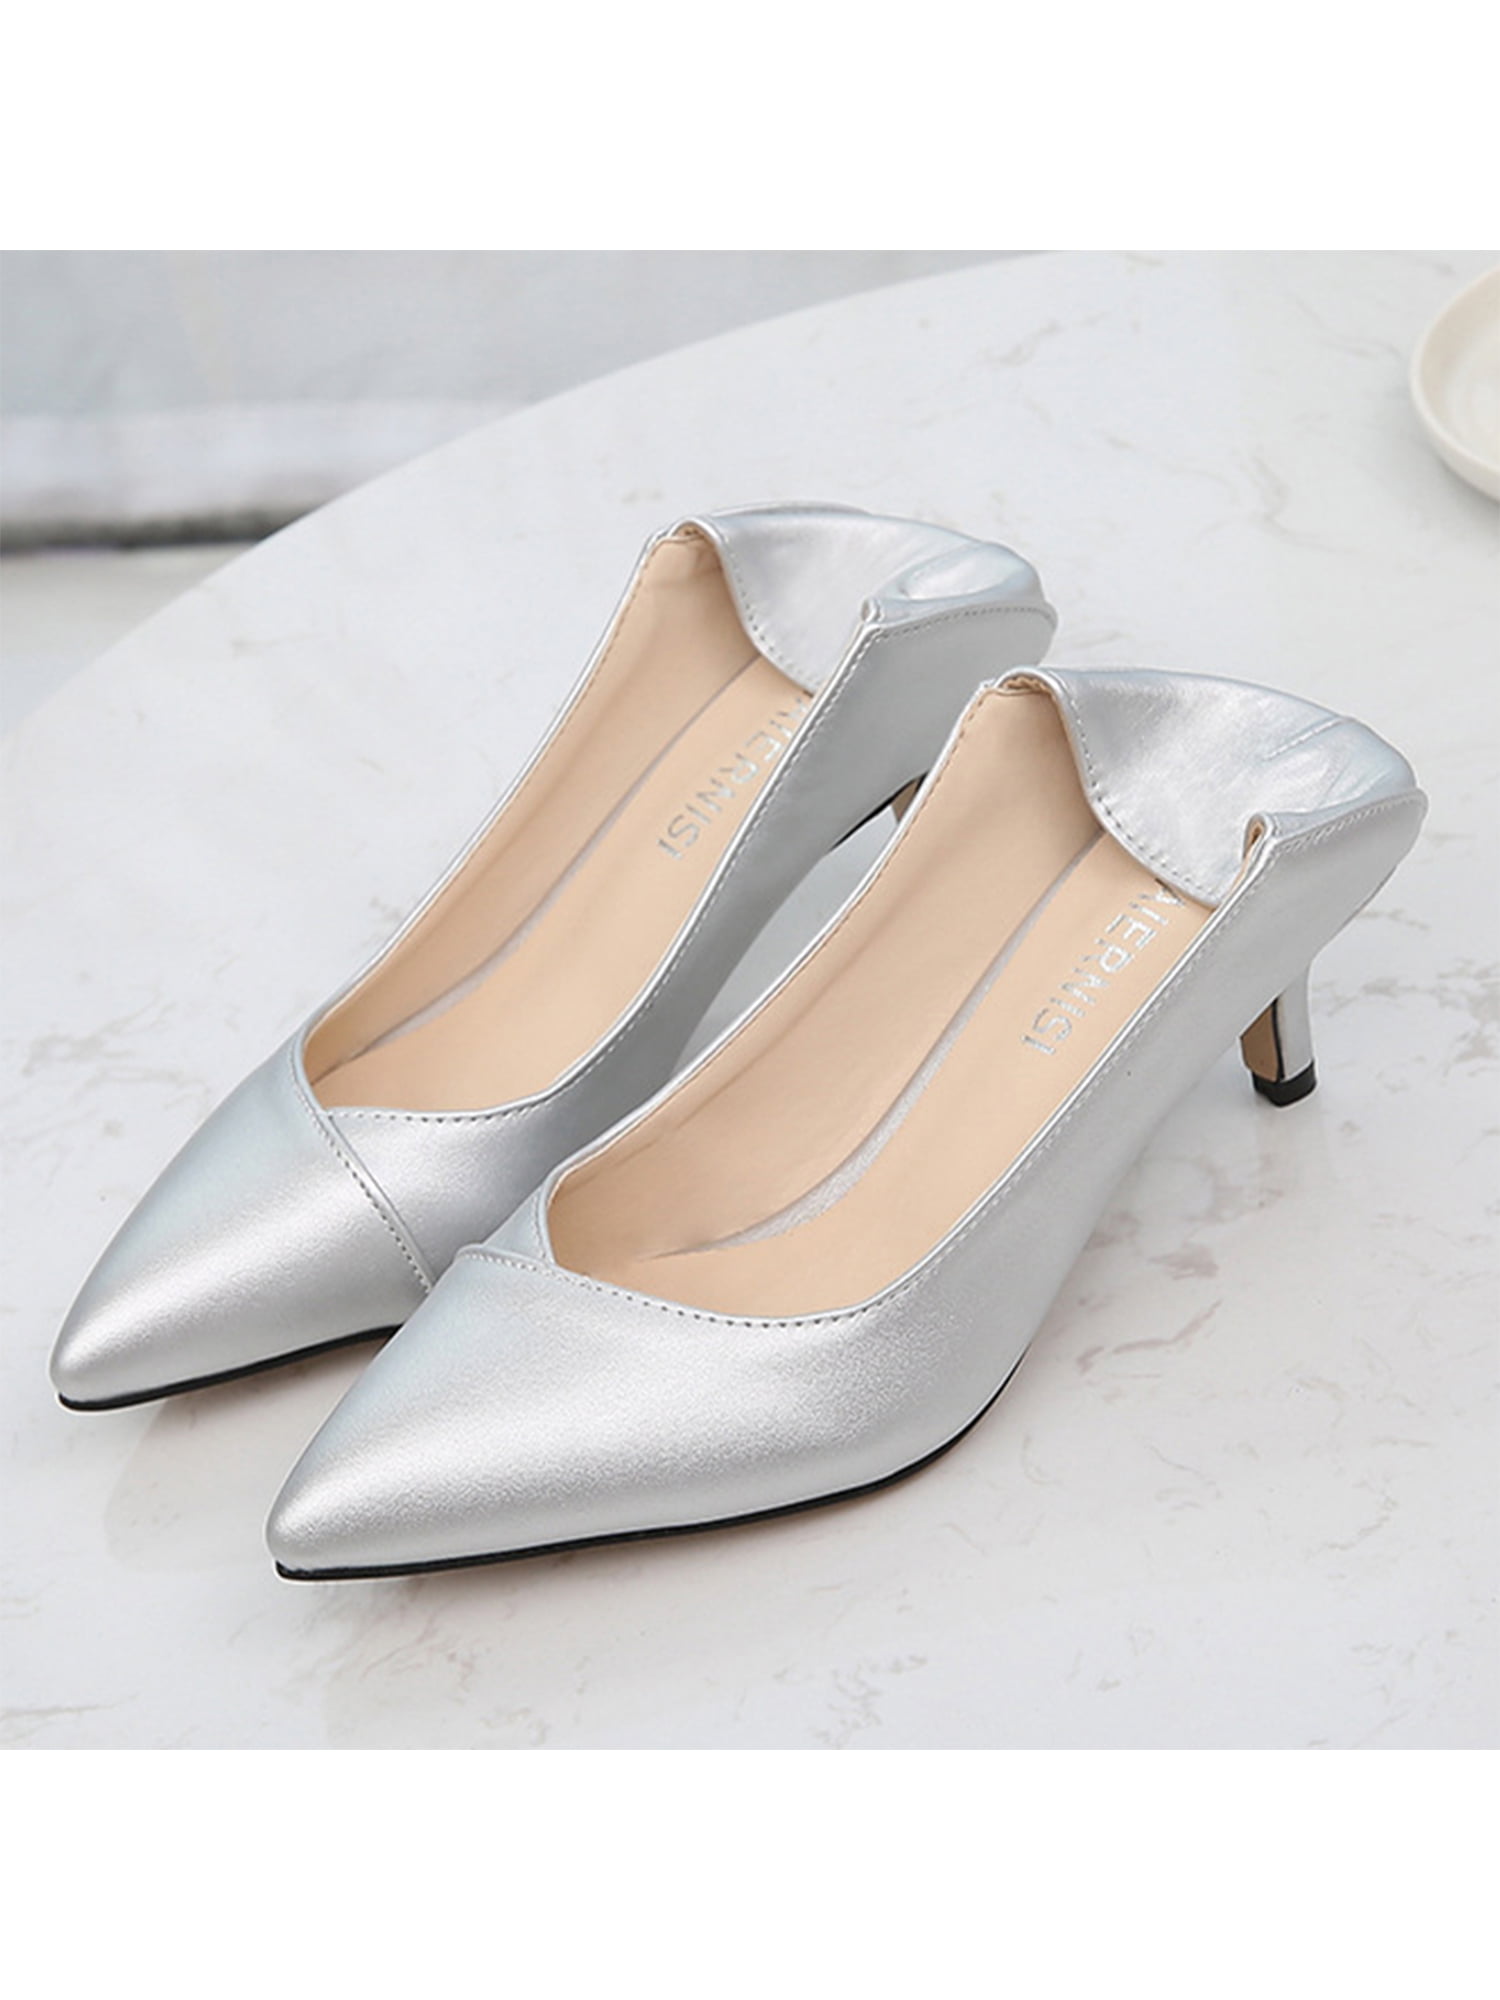 Women Pumps Mid Heel Pump Ladies Pointed Toe Casual Shoes Sandals High Heels  Wedding Sexy Pumps Gold Silver Zapatos Mujer 8cm - AliExpress